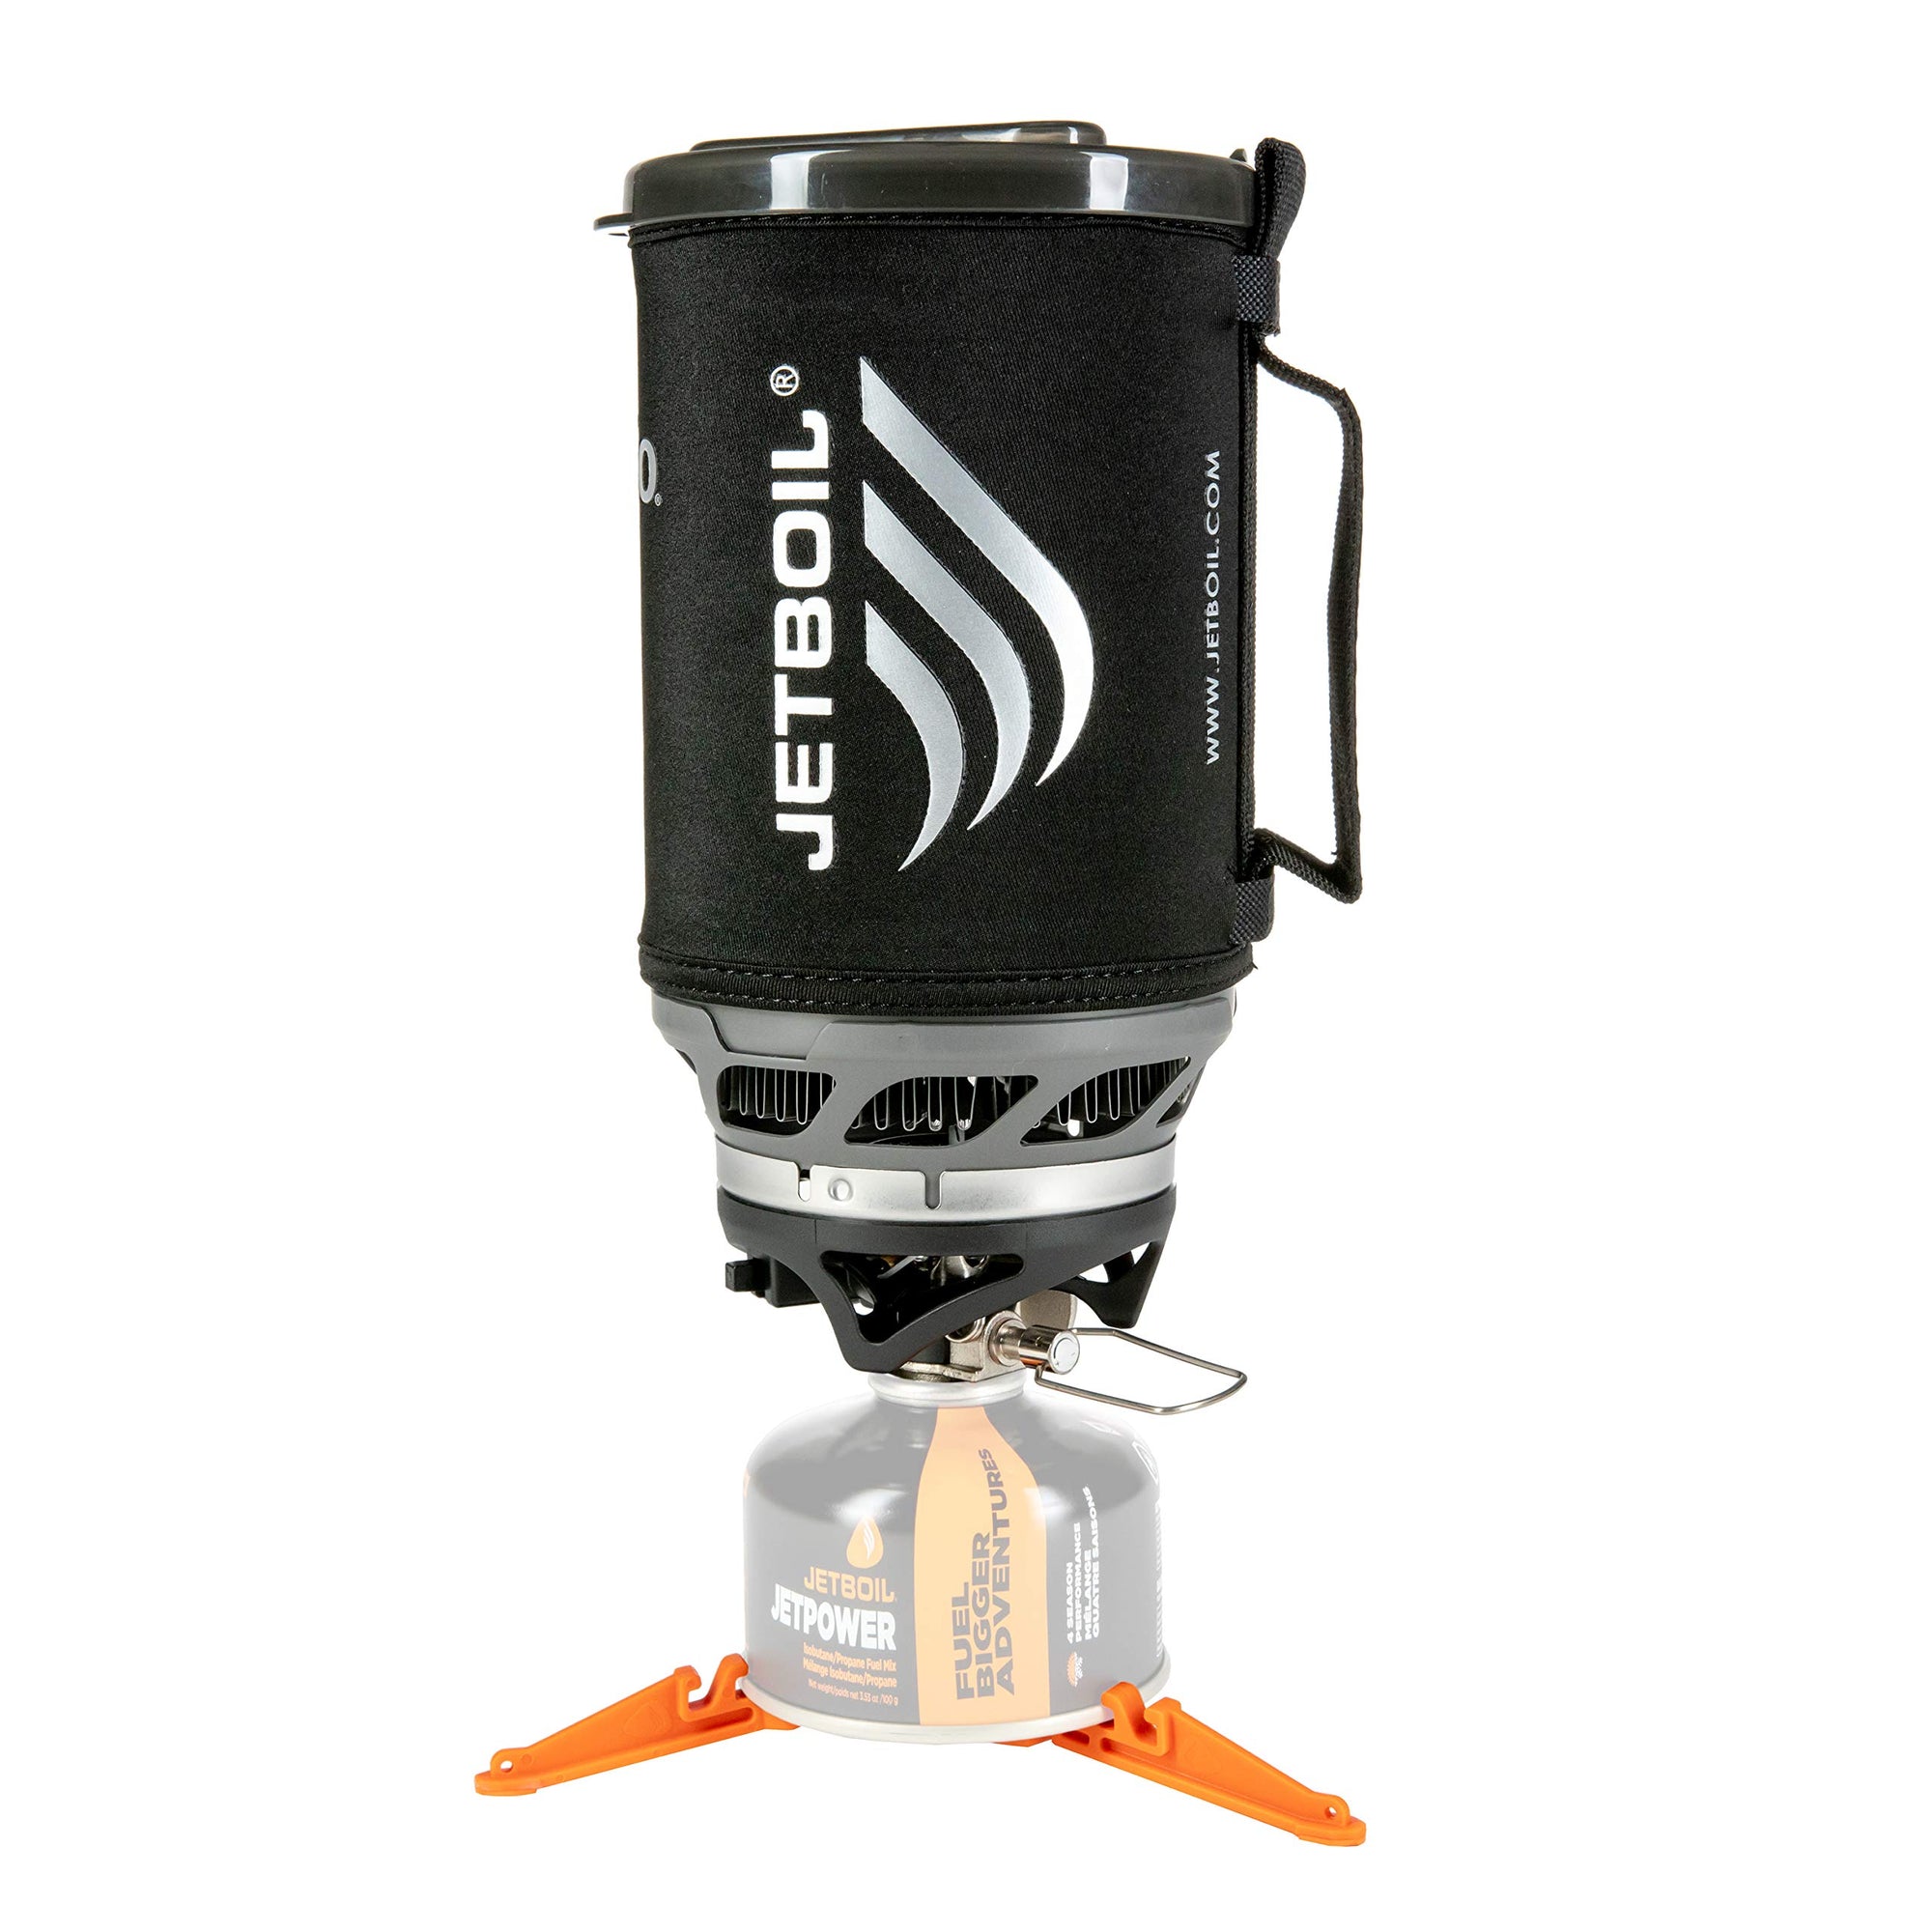 Jetboil Sumo Camping Stove Cooking System, Carbon